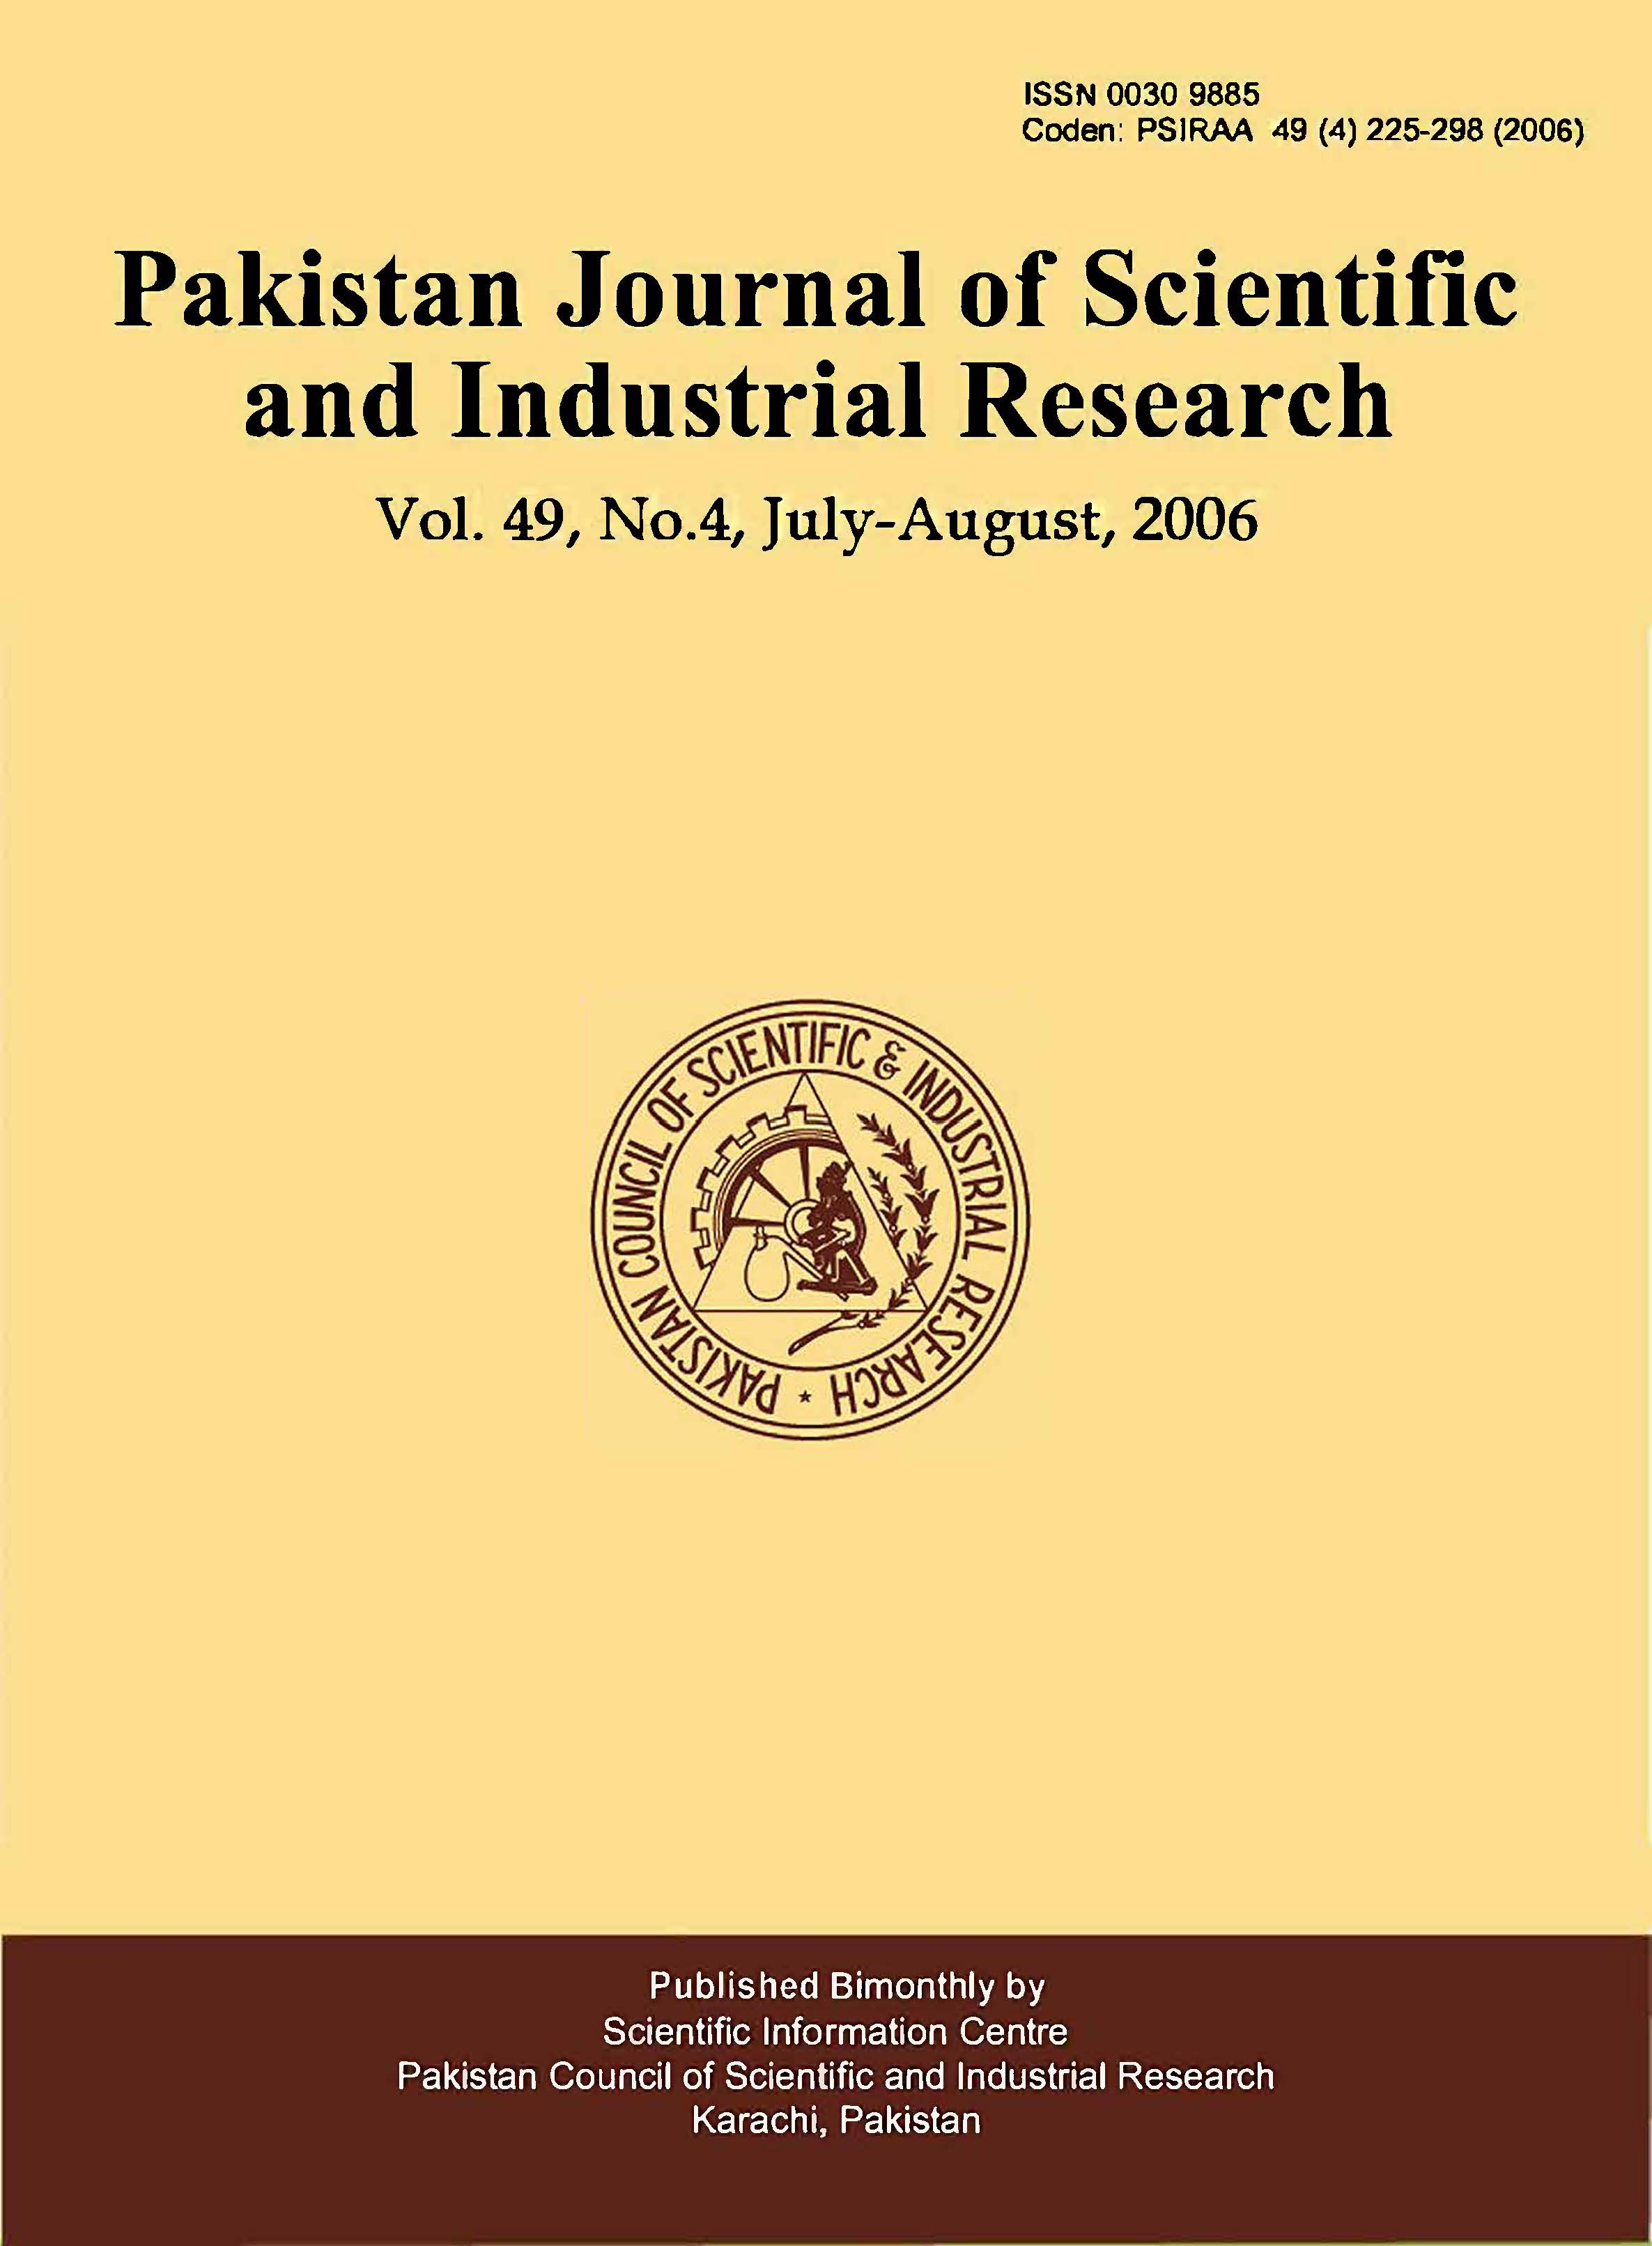 					View Vol. 49 No. 4 (2006): Pakistan Journal of Scientific and Industrial Research
				